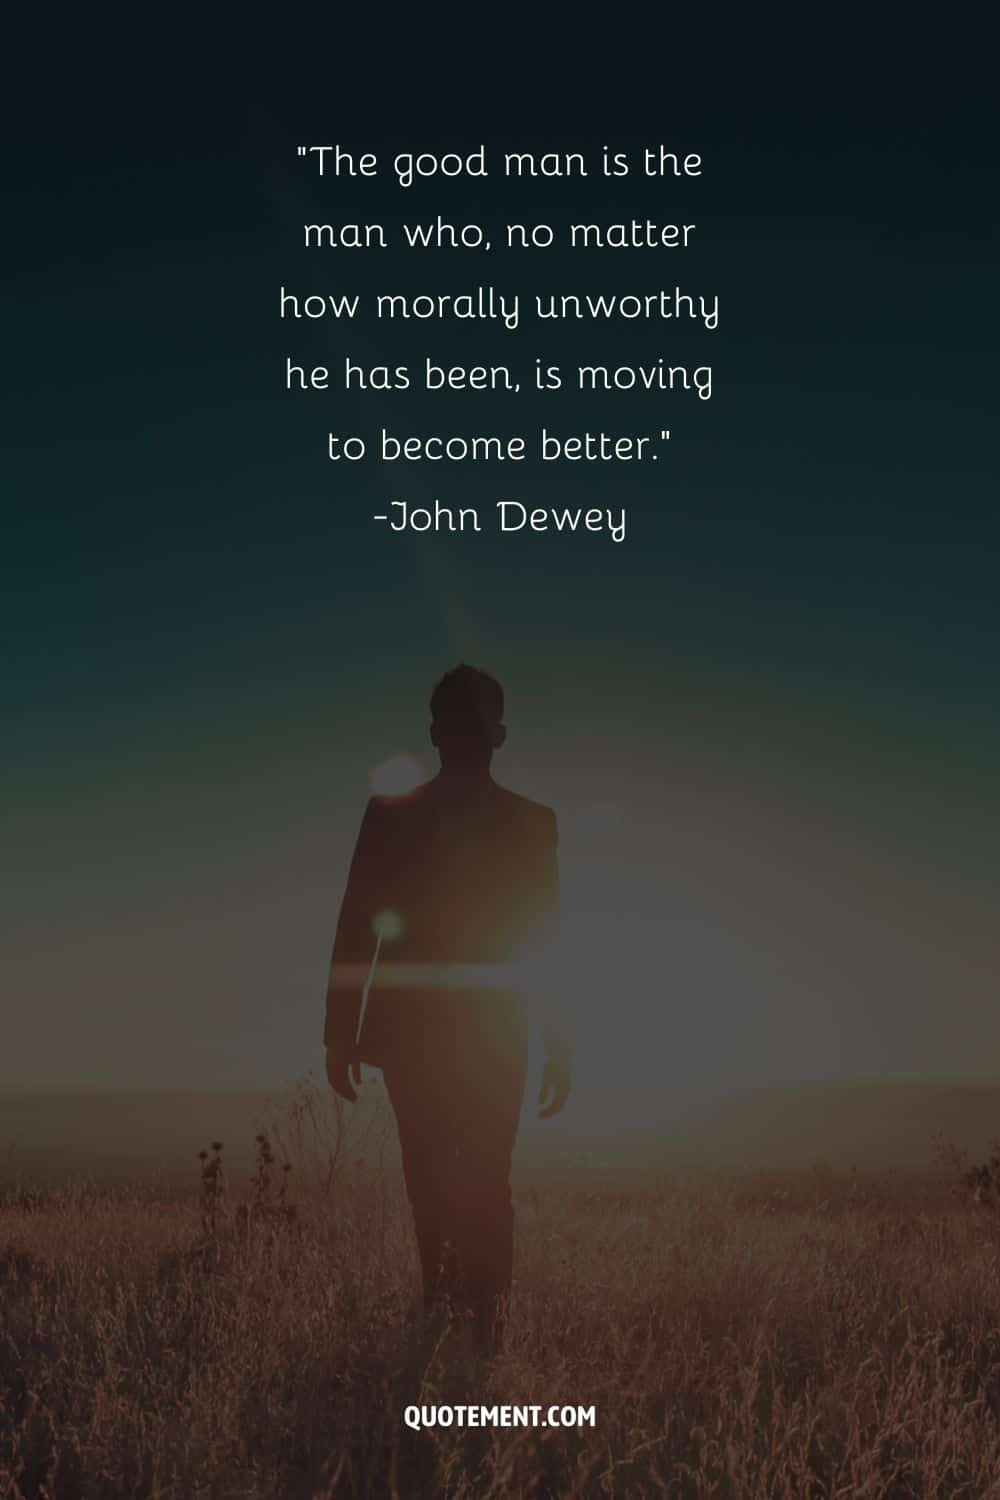 The good man is the man who, no matter how morally unworthy he has been, is moving to become better.